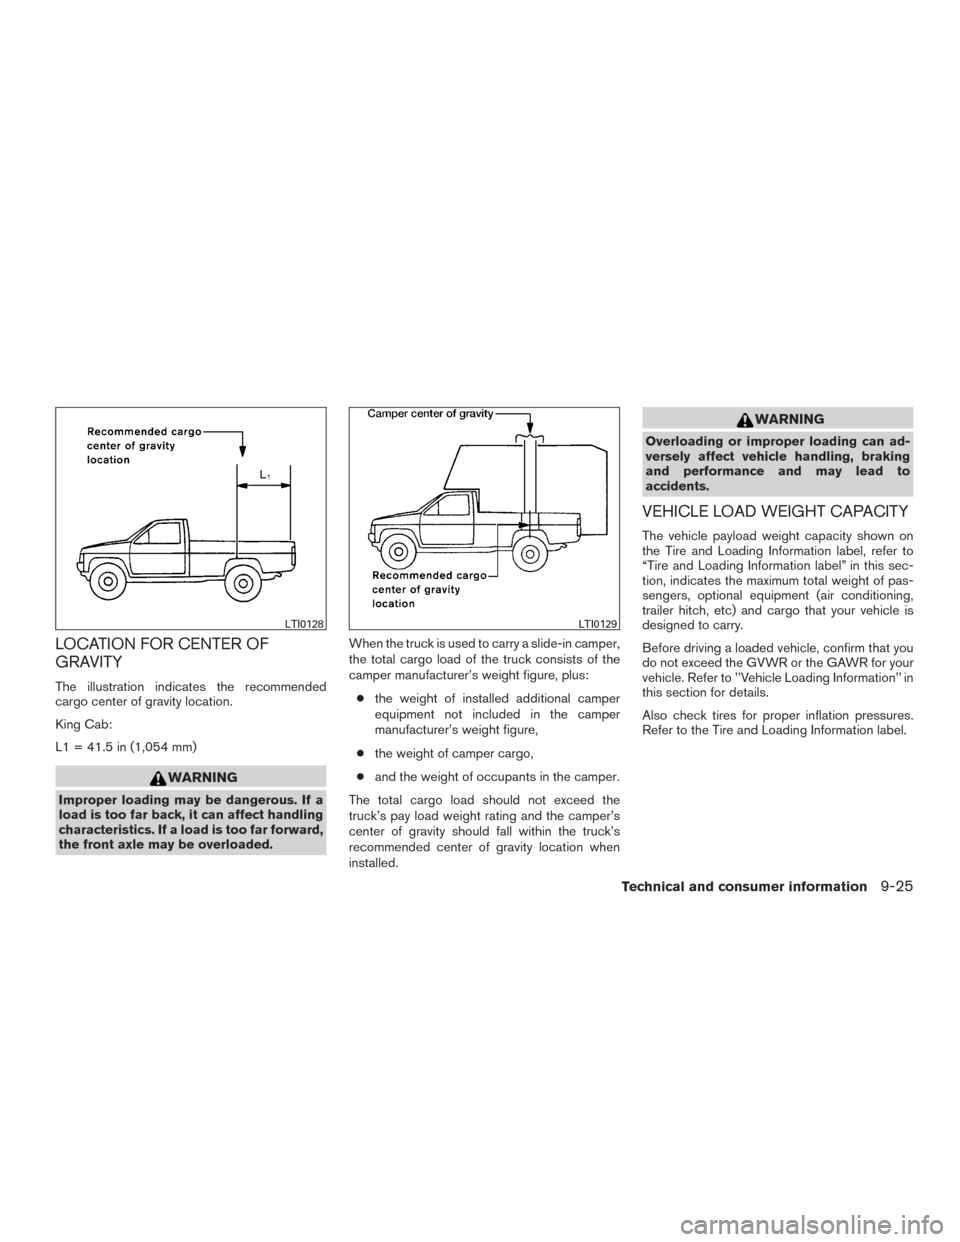 NISSAN FRONTIER 2015 D23 / 3.G Owners Guide LOCATION FOR CENTER OF
GRAVITY
The illustration indicates the recommended
cargo center of gravity location.
King Cab:
L1 = 41.5 in (1,054 mm)
WARNING
Improper loading may be dangerous. If a
load is to